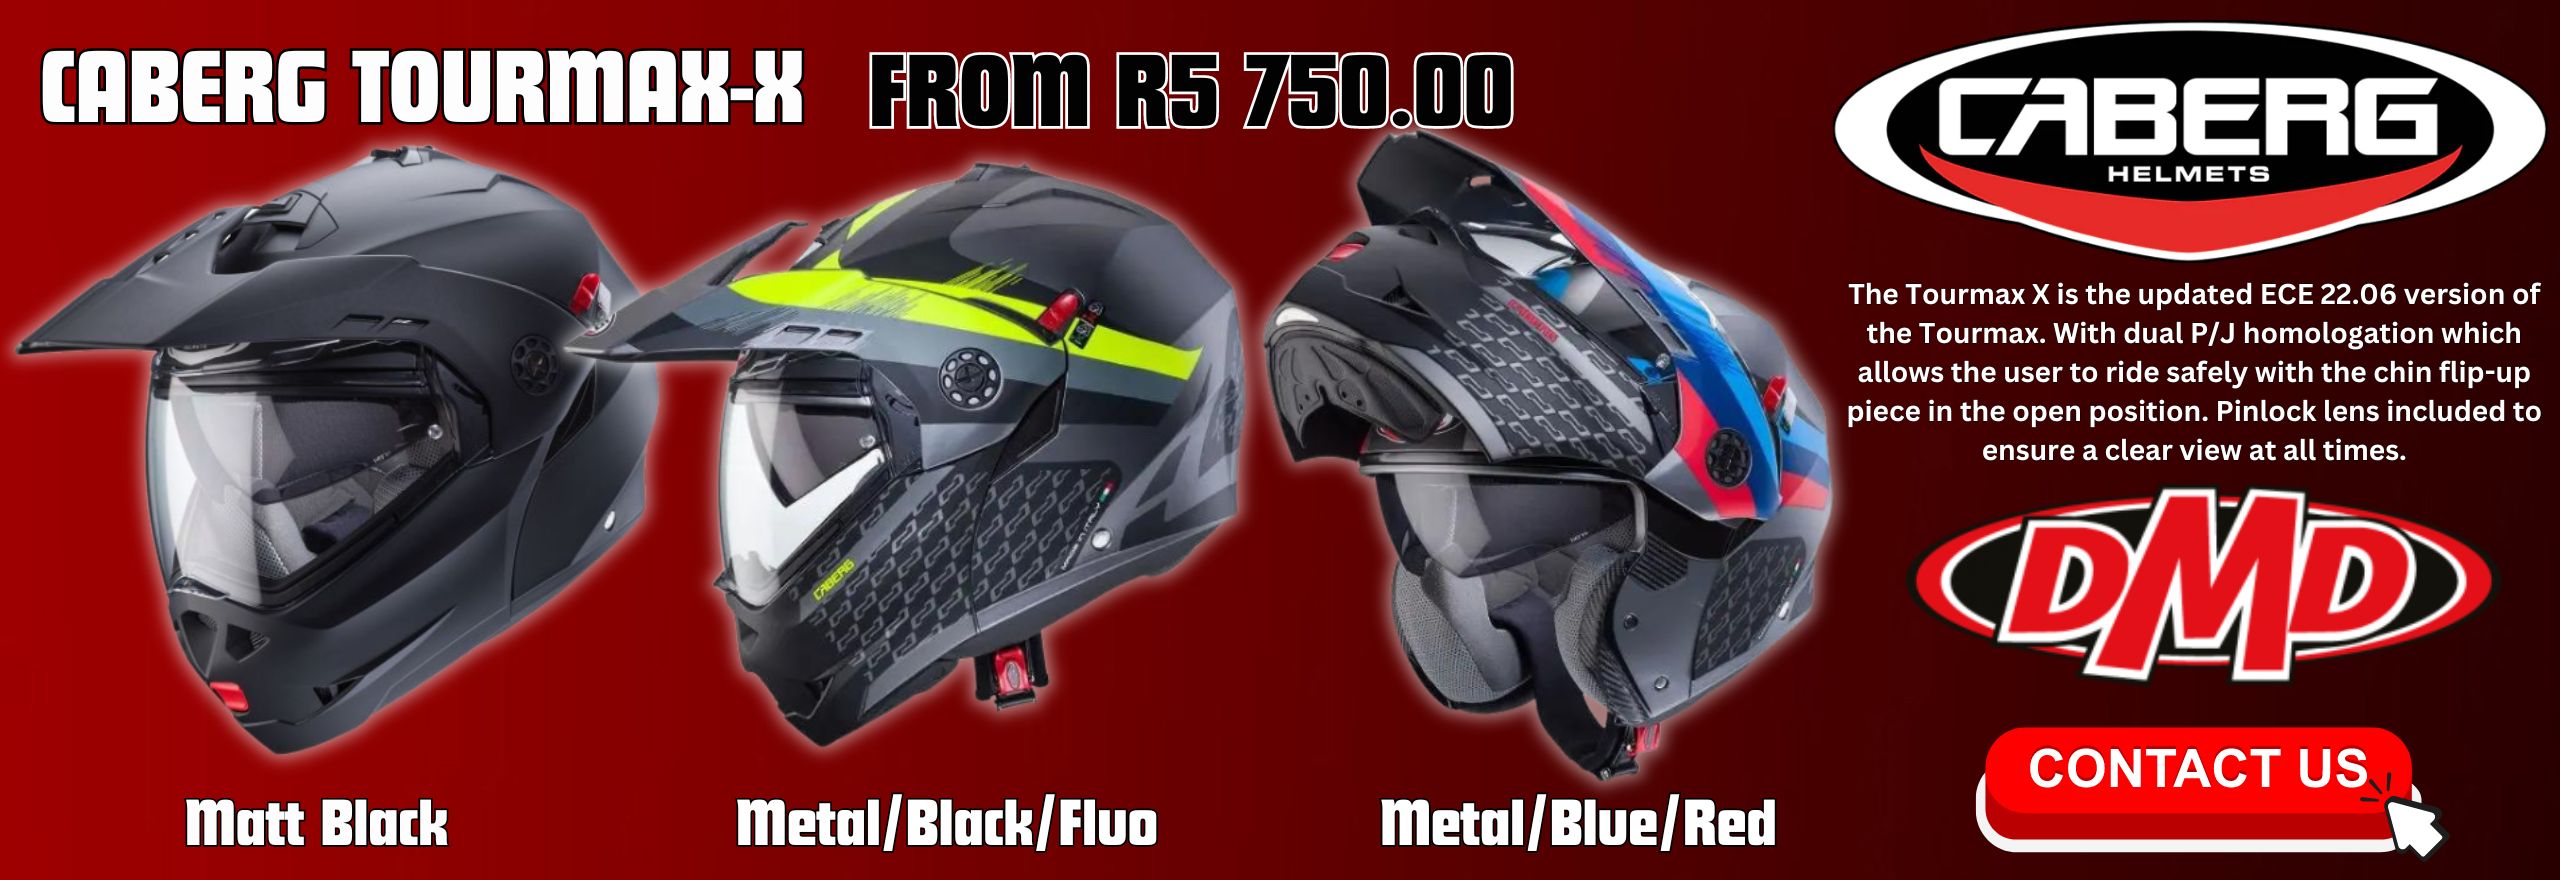 Caberg motorcycle helmets south africa